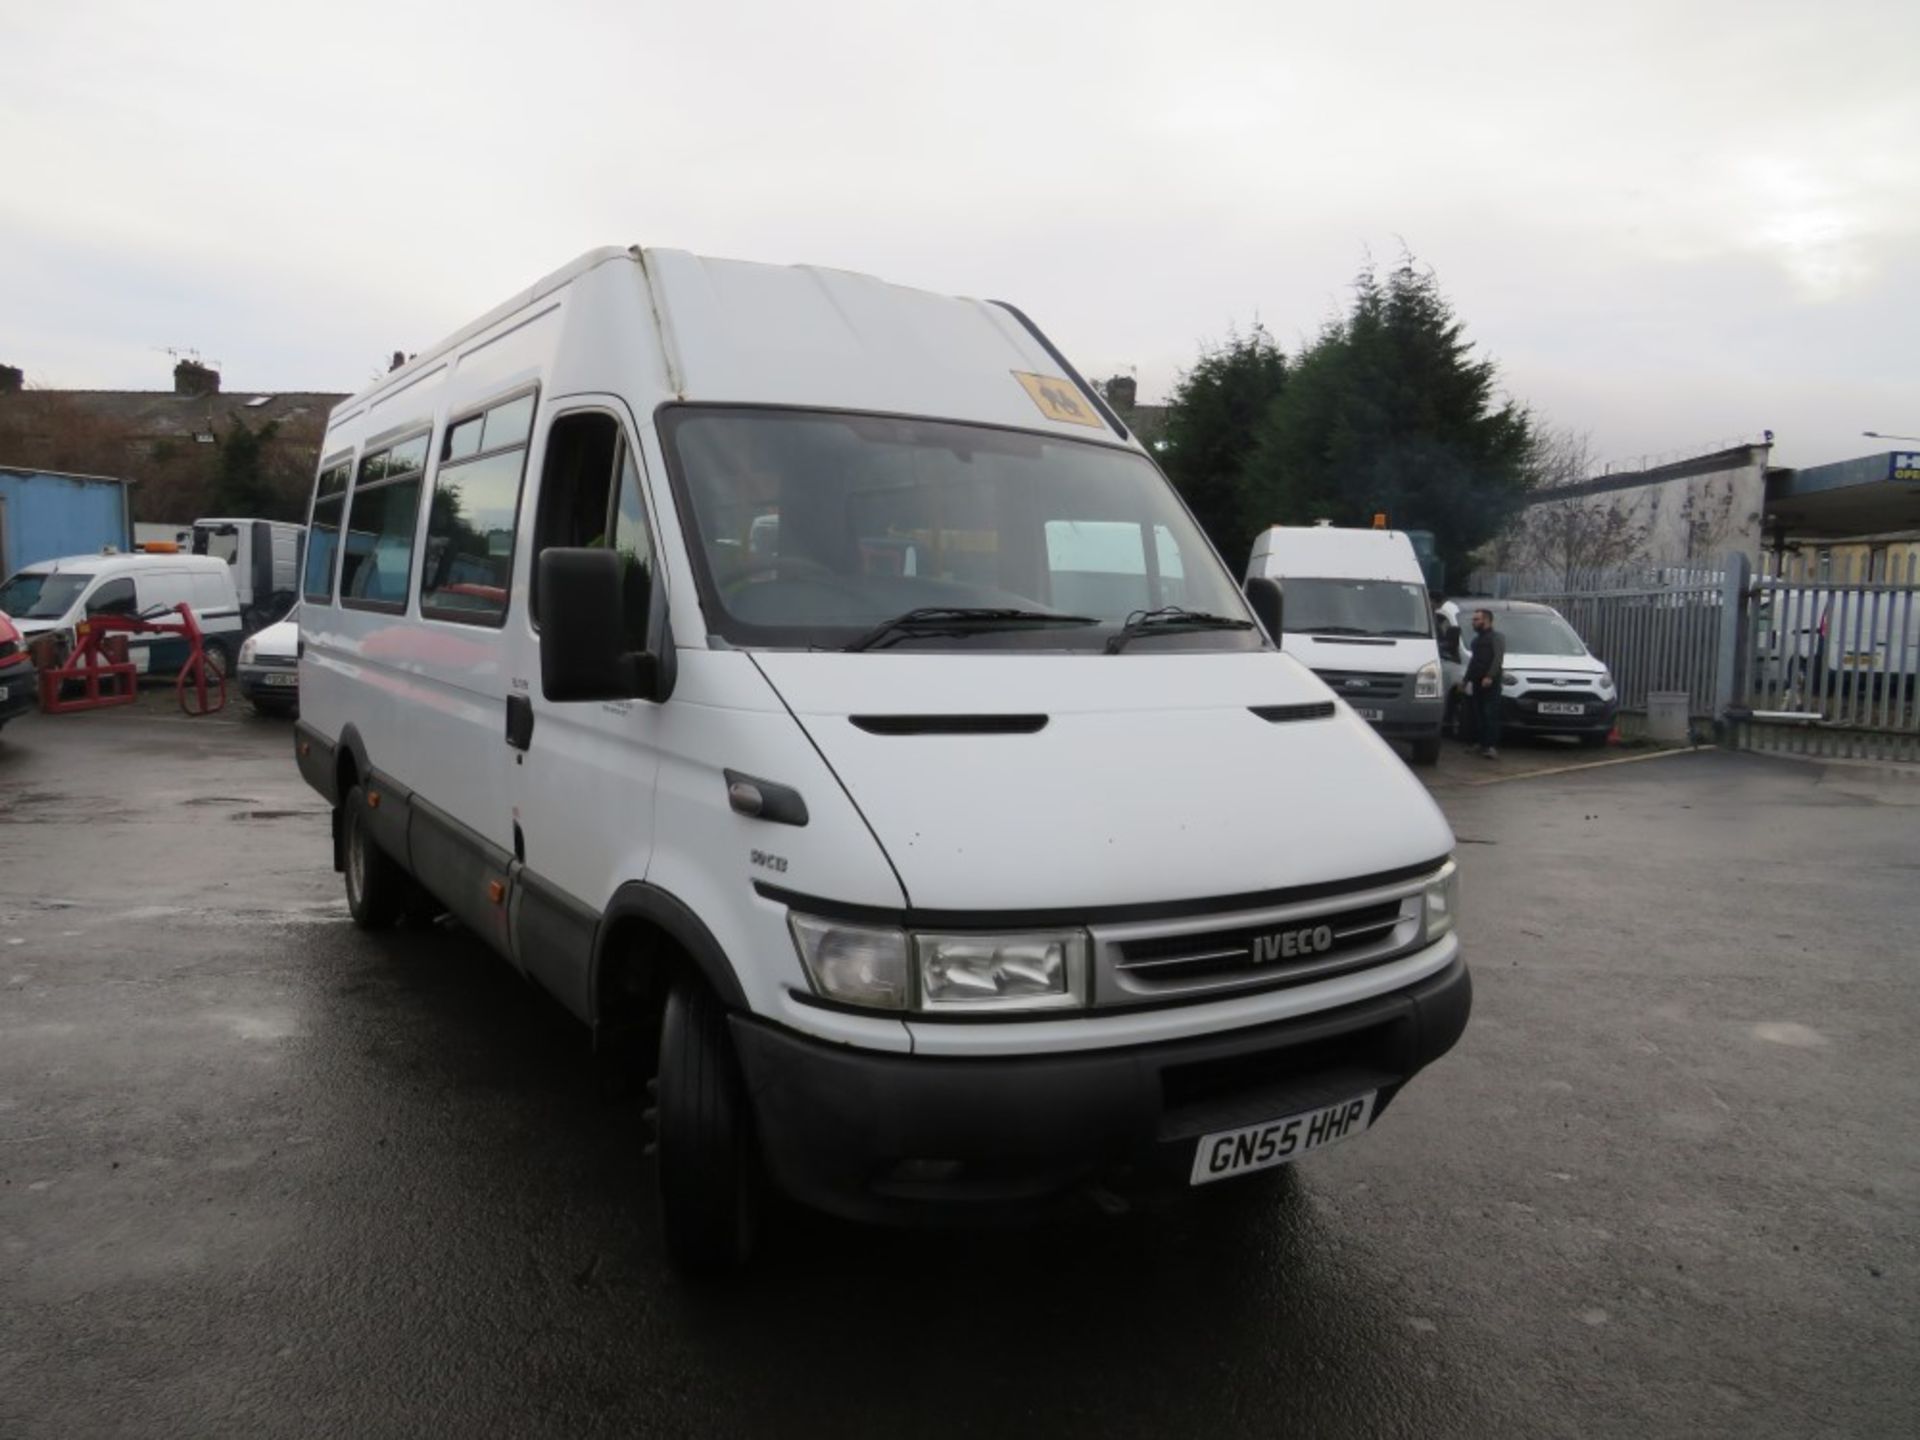 55 reg IVECO DAILY 50C13 MINIBUS, 1ST REG 12/05, TEST 04/20, 268353KM NOT WARRANTED, V5 HERE, 1